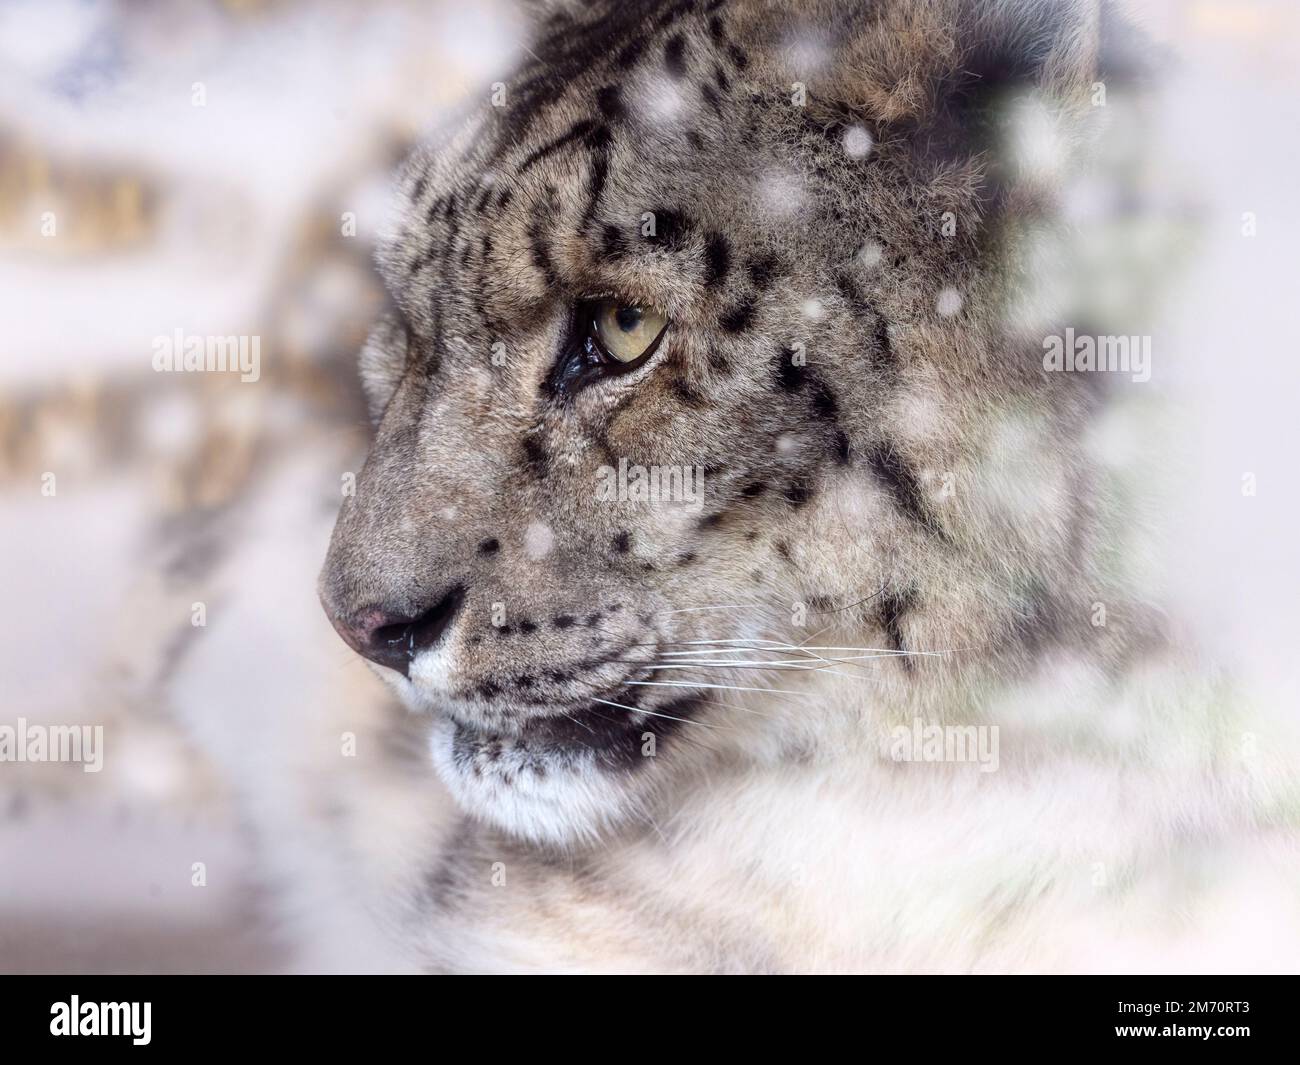 Snow leopard or ounce Panthera uncia in snow storm Stock Photo